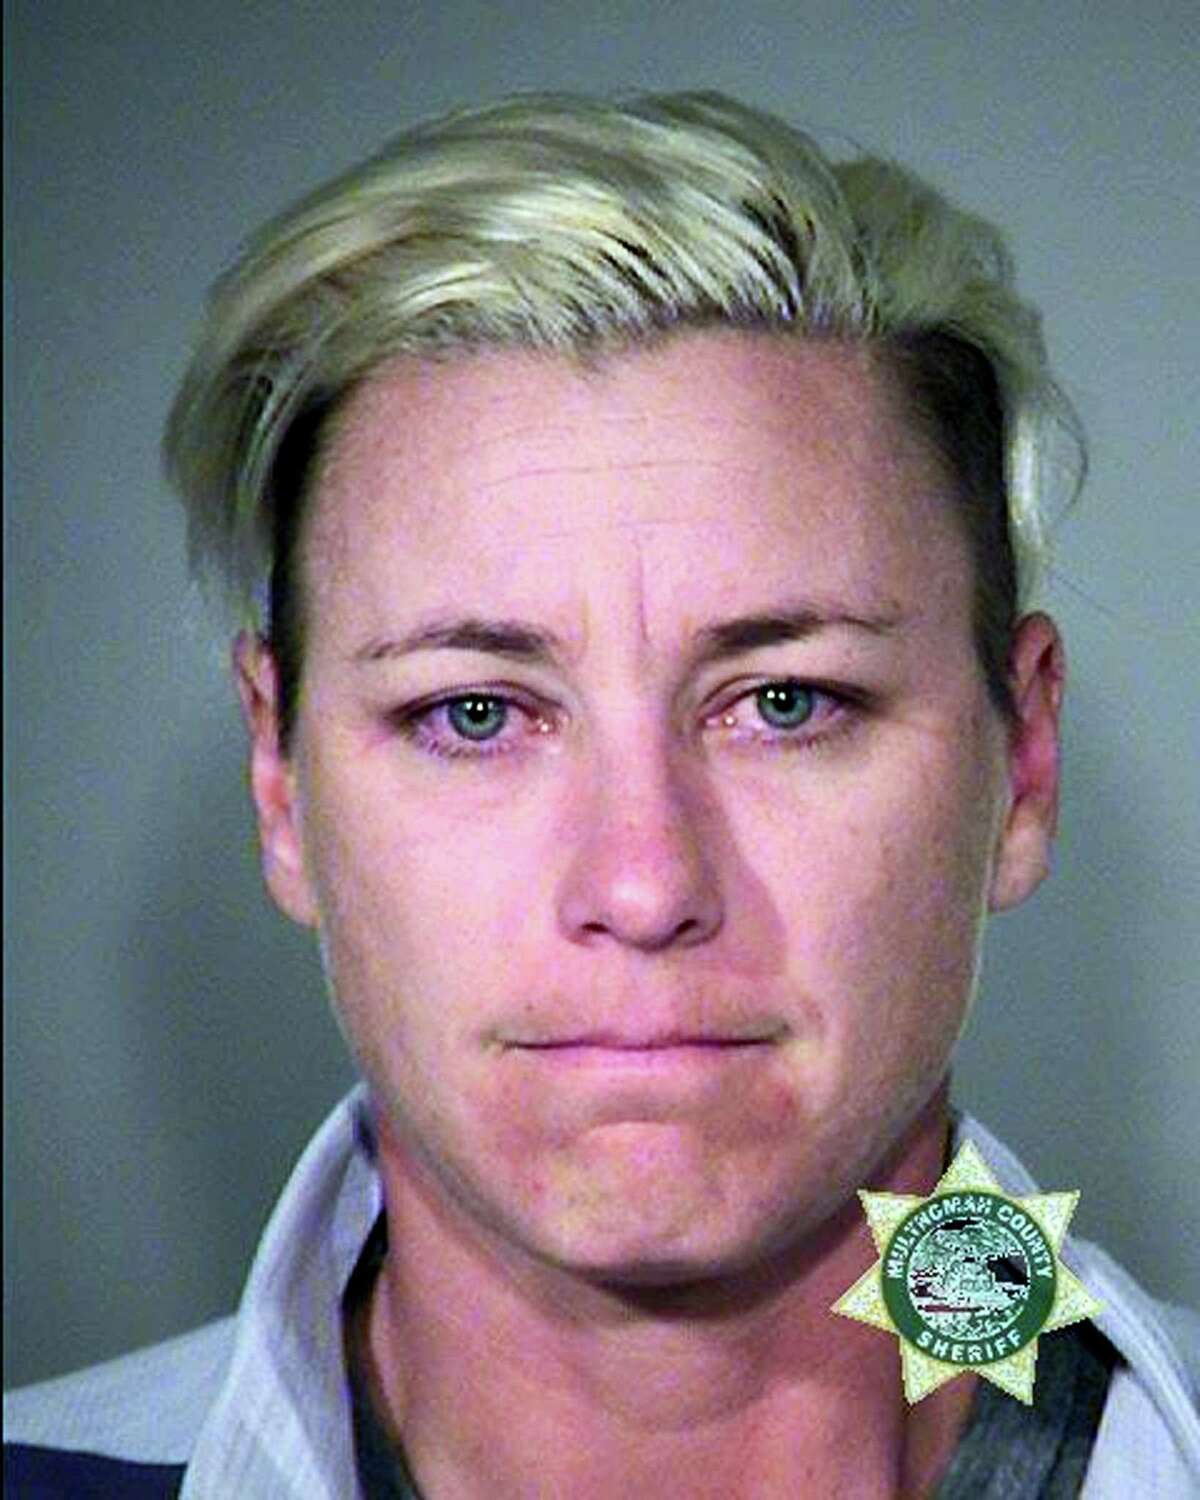 This undated photo provided by Multnomah County Sheriff’s Office shows retired World Cup soccer champion Abby Wambach.